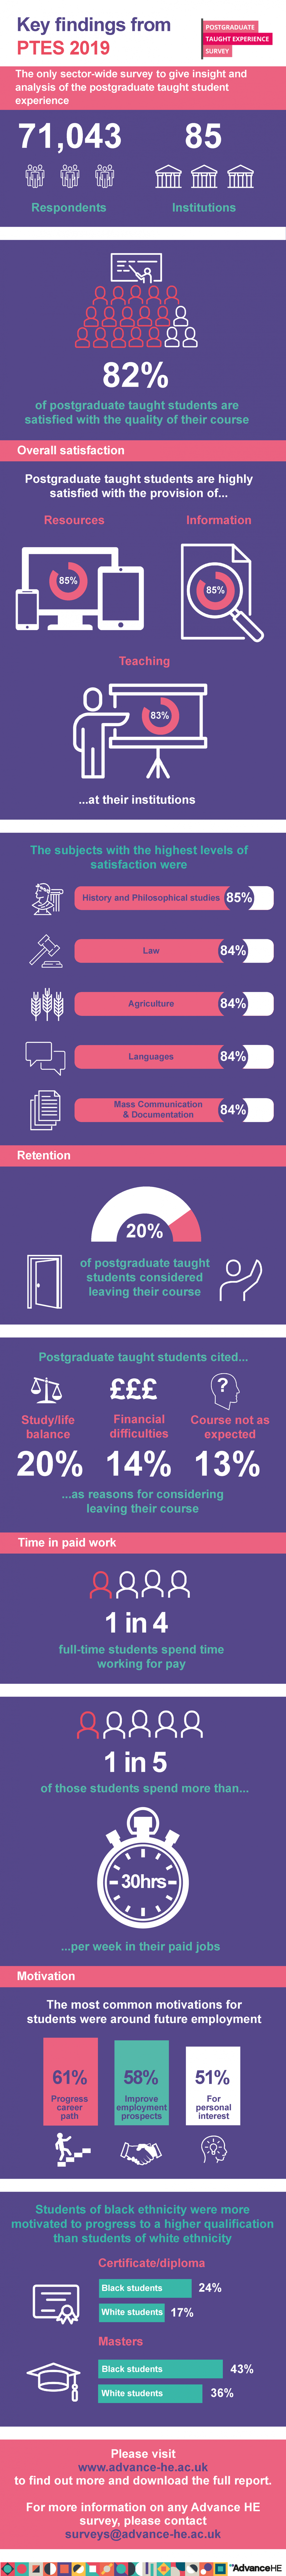 PTES 2019 Infographic